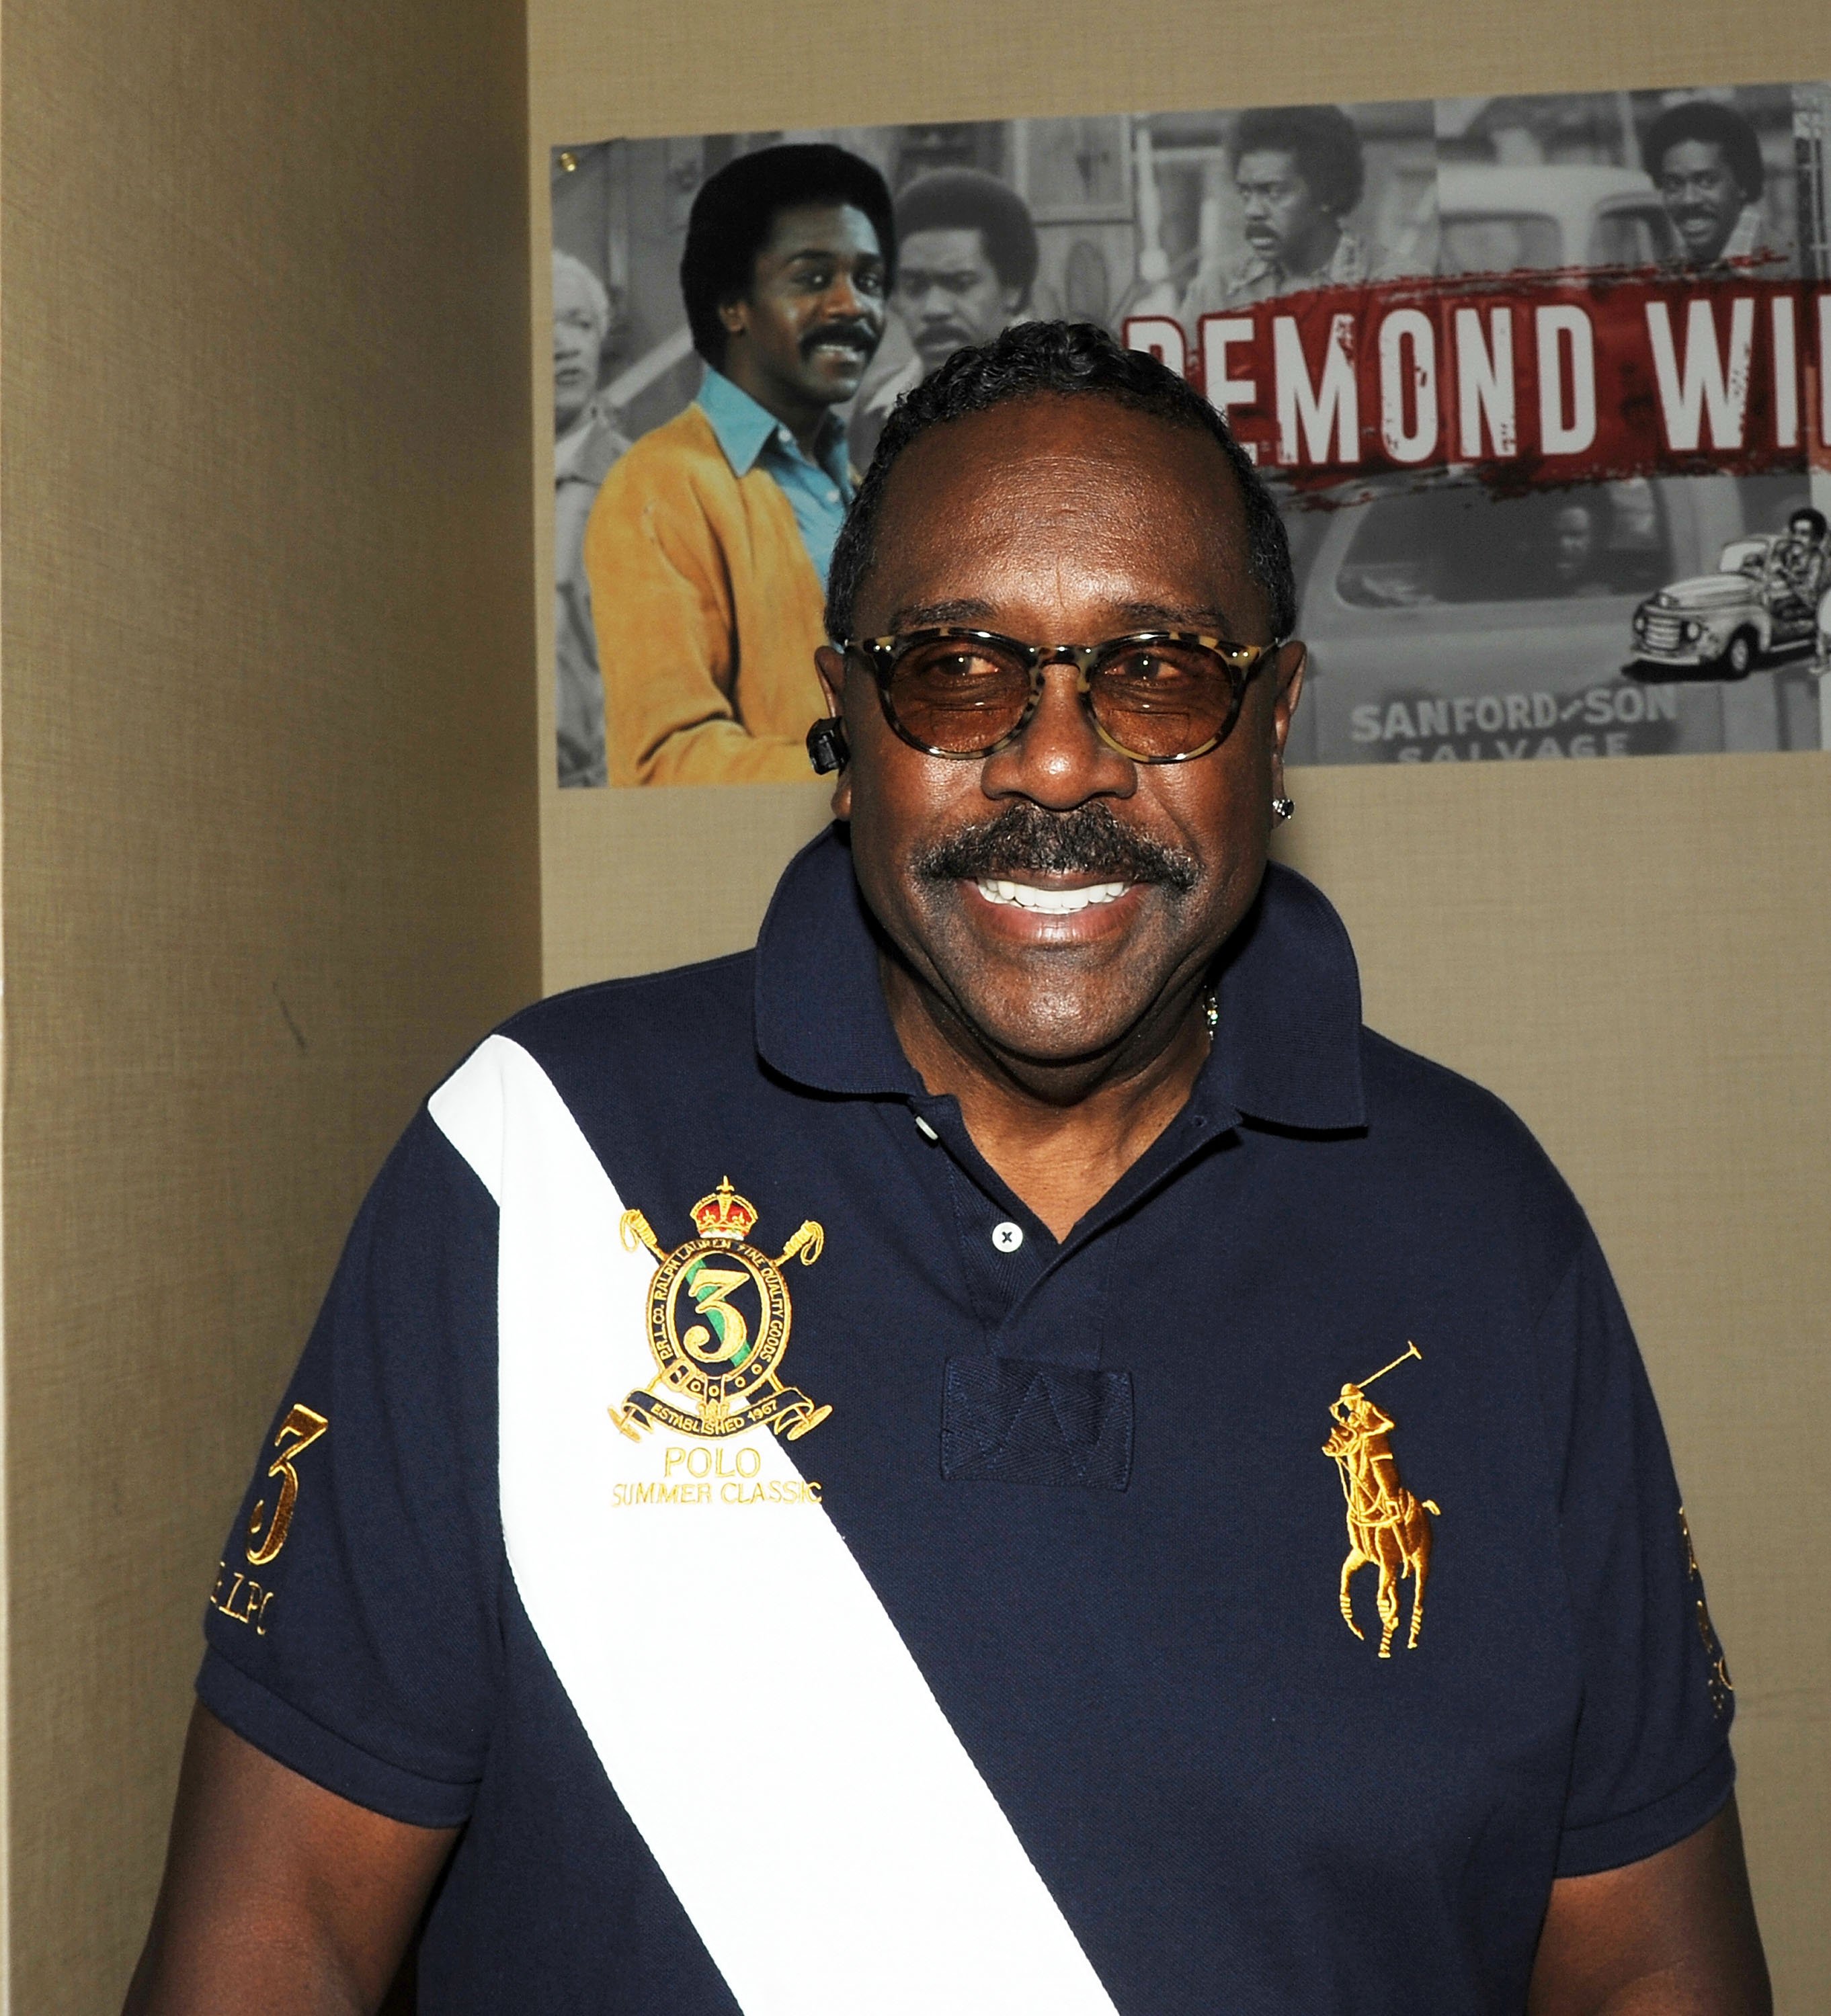 Demond Wilson pictured at the 2016 Chiller Theater Expo at Parsippany Hilton, Parsippany, New Jersey. | Photo: Getty Images